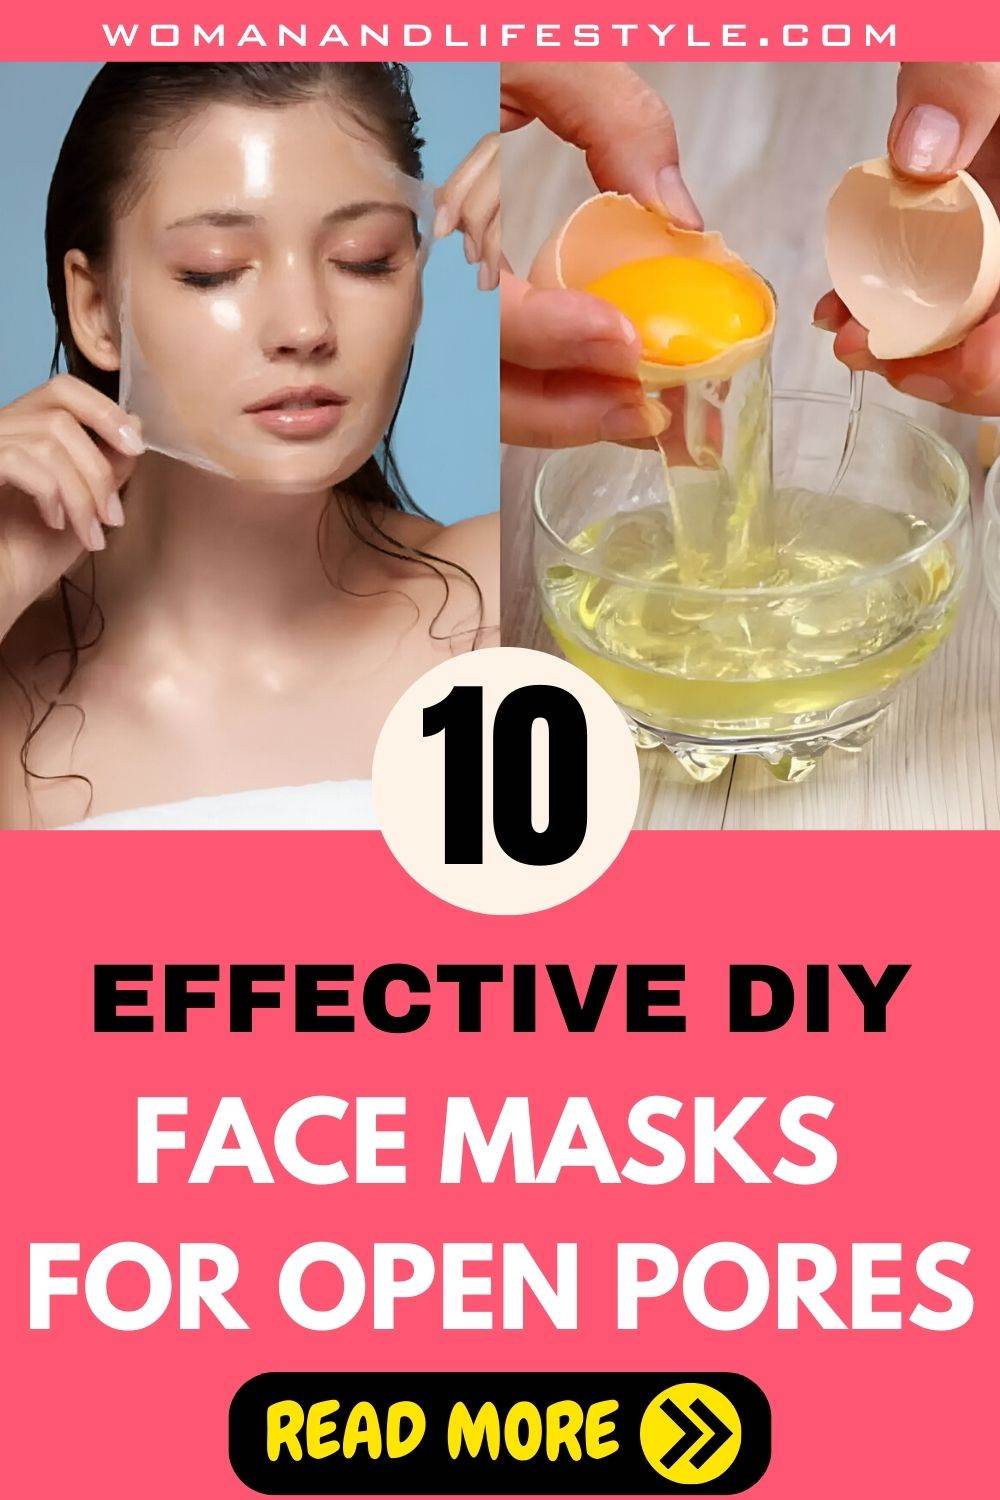 10 Effective DIY Face Masks To Deal With Open Pores - 41